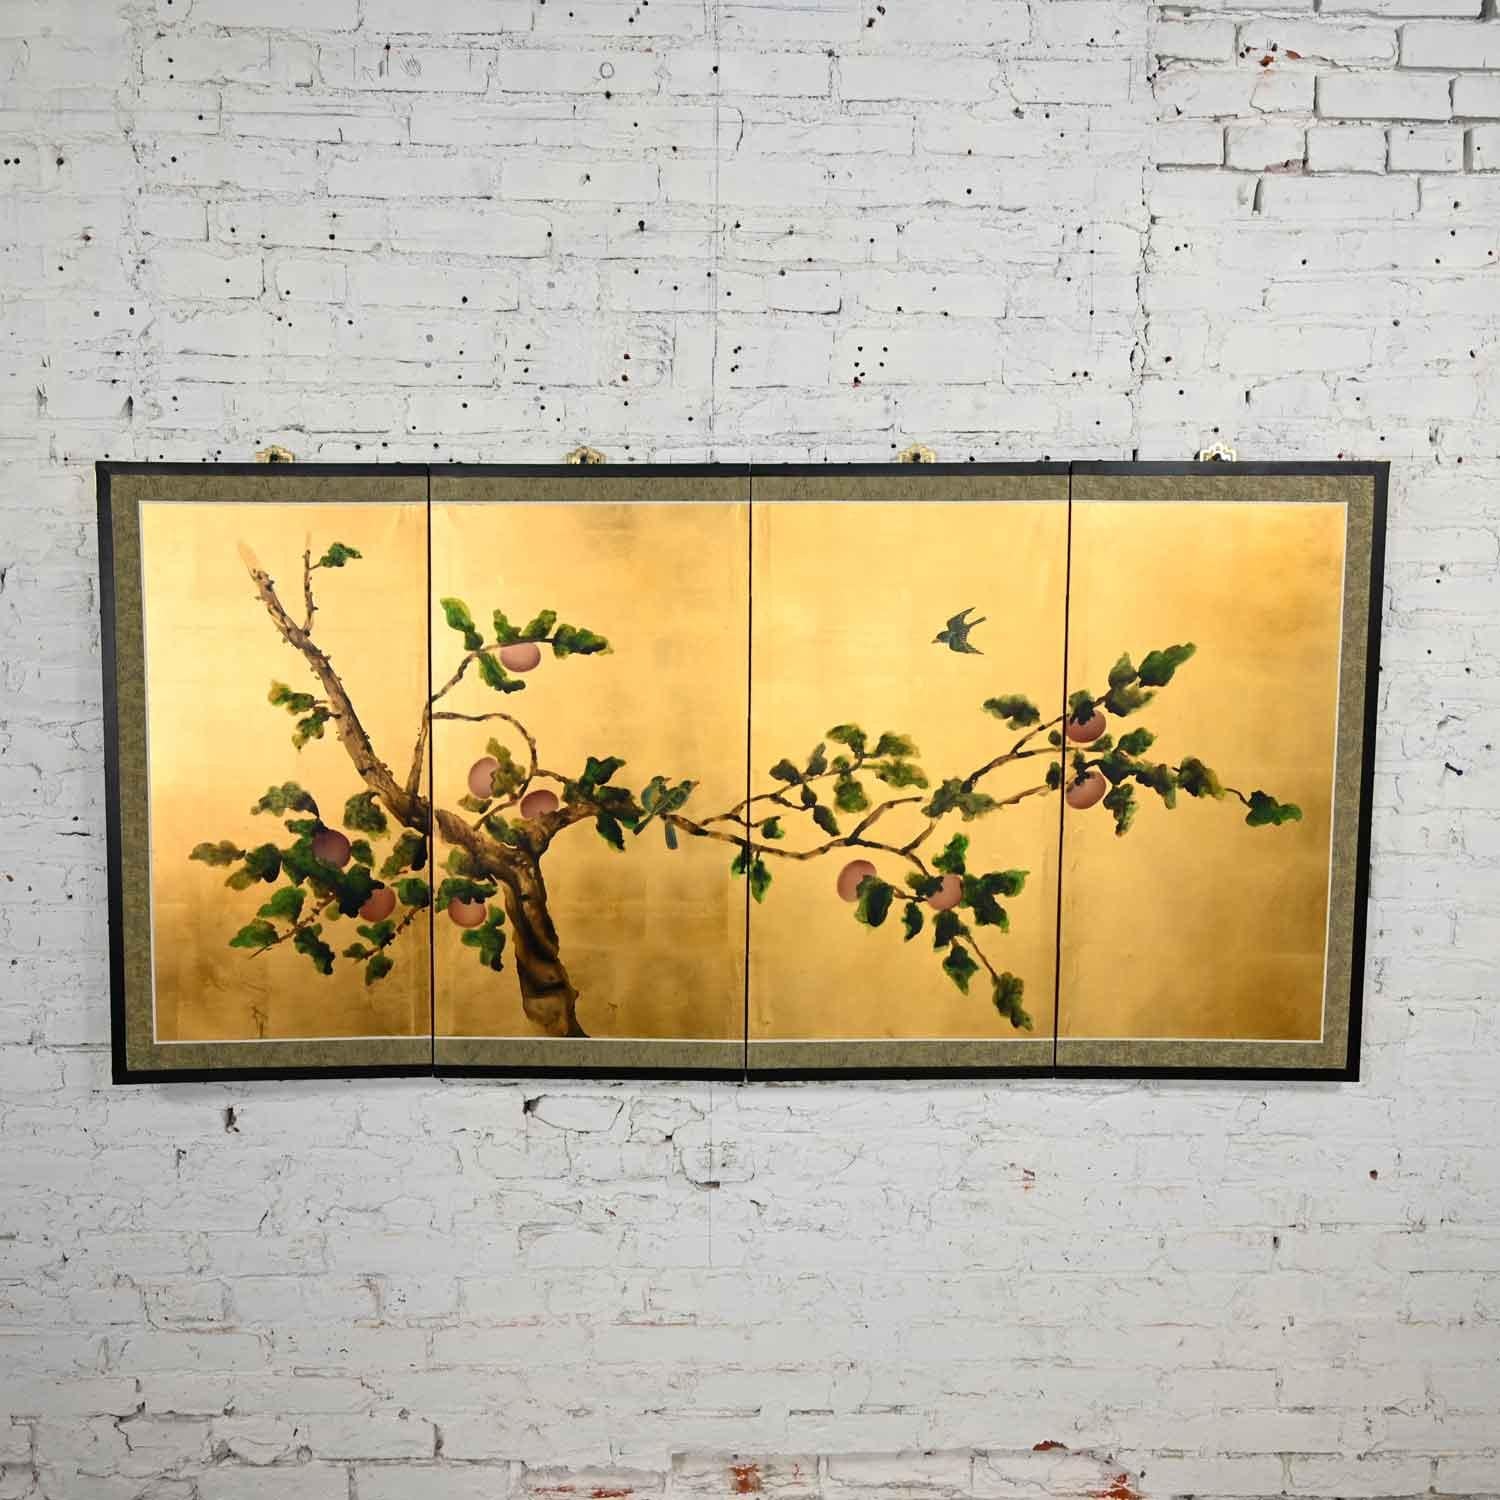 Stunning vintage Asian or Chinoiserie four panel silk Japanese byobu, folding screen, or wall hanging with brass hanging brackets. Beautiful condition, keeping in mind that this is vintage and not new so will have signs of use and wear. No